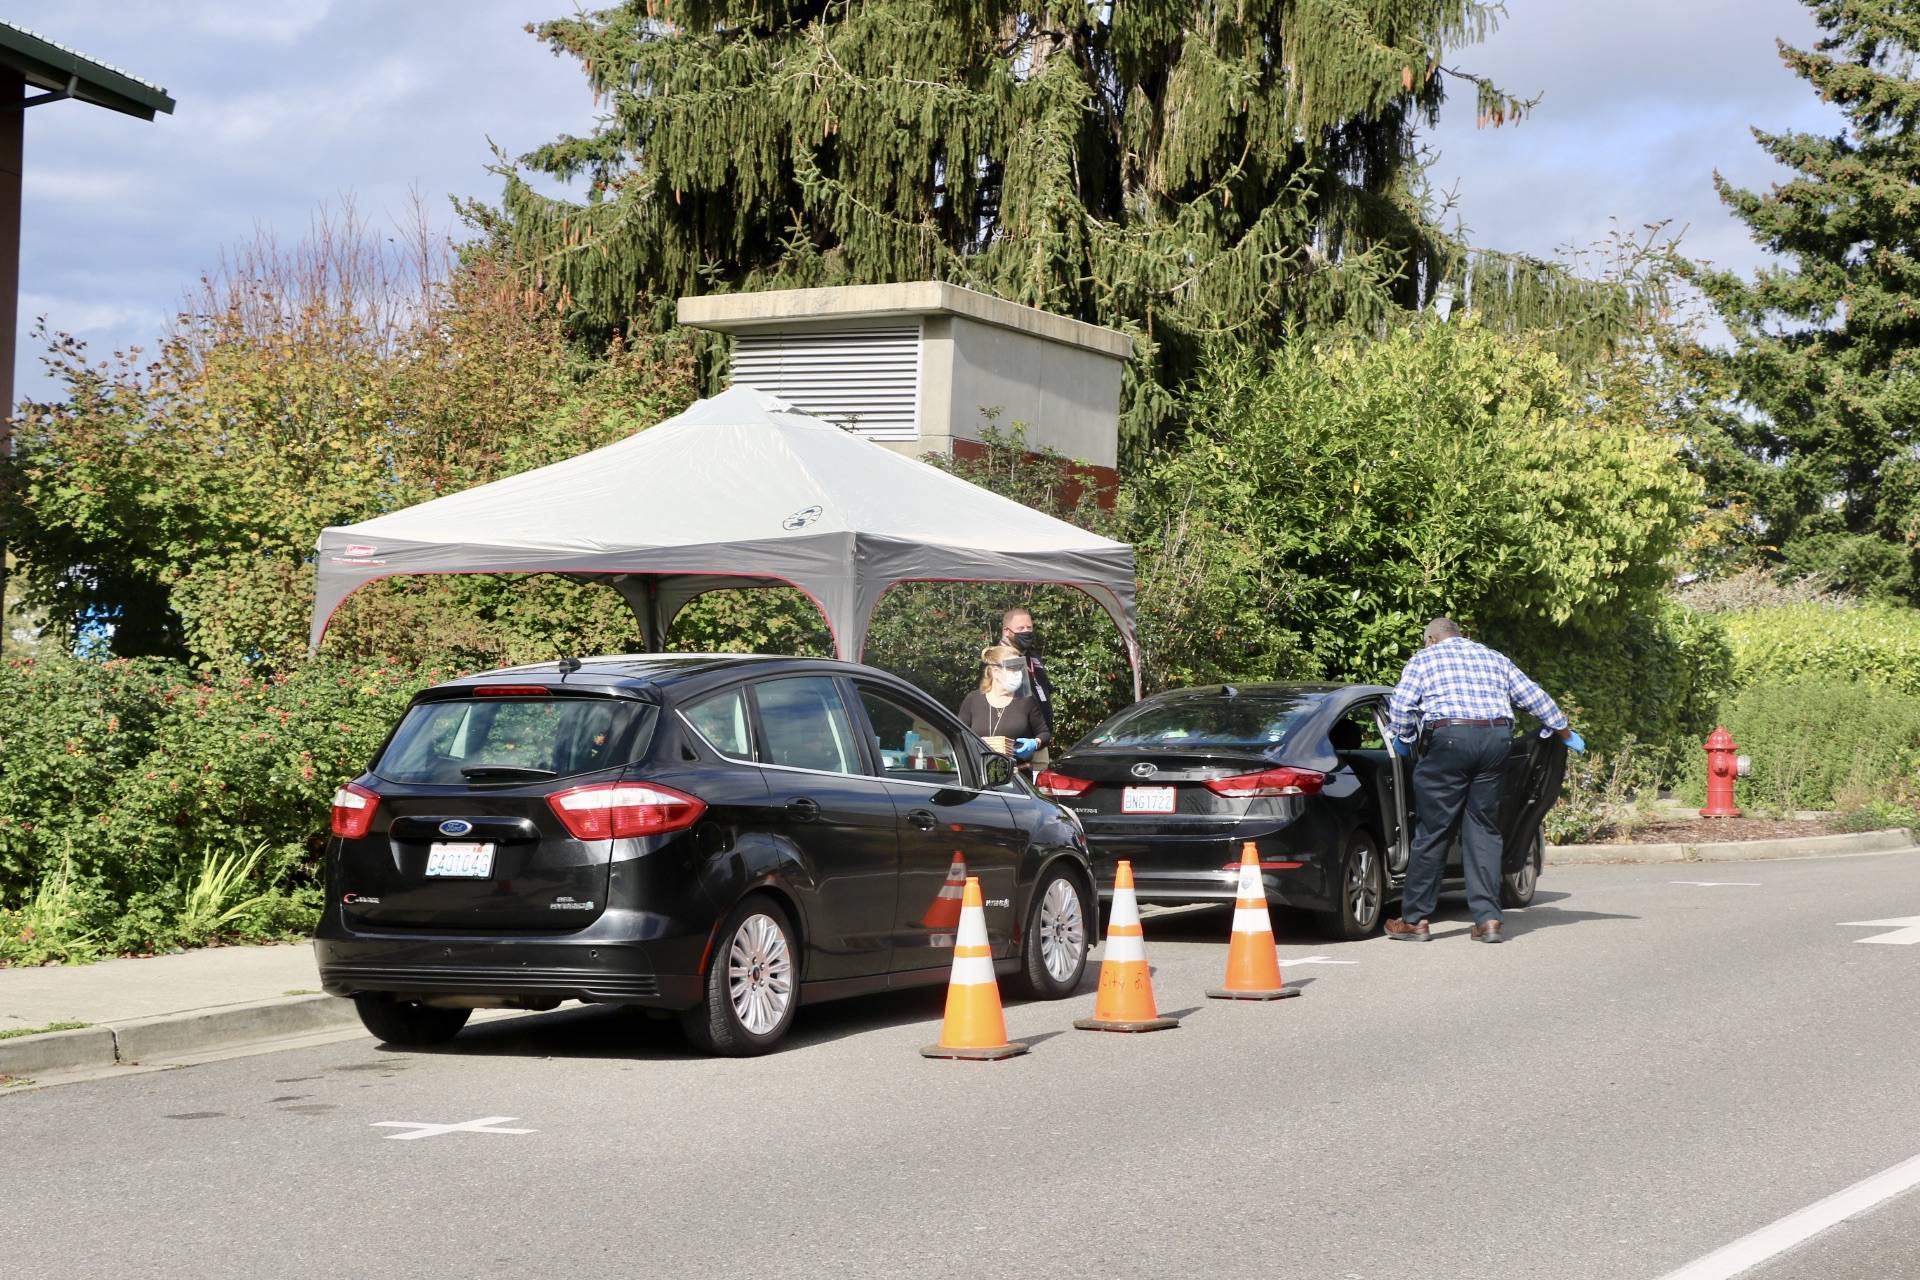 Those without insurance went to the far tent hosted by Kitsap Health District.